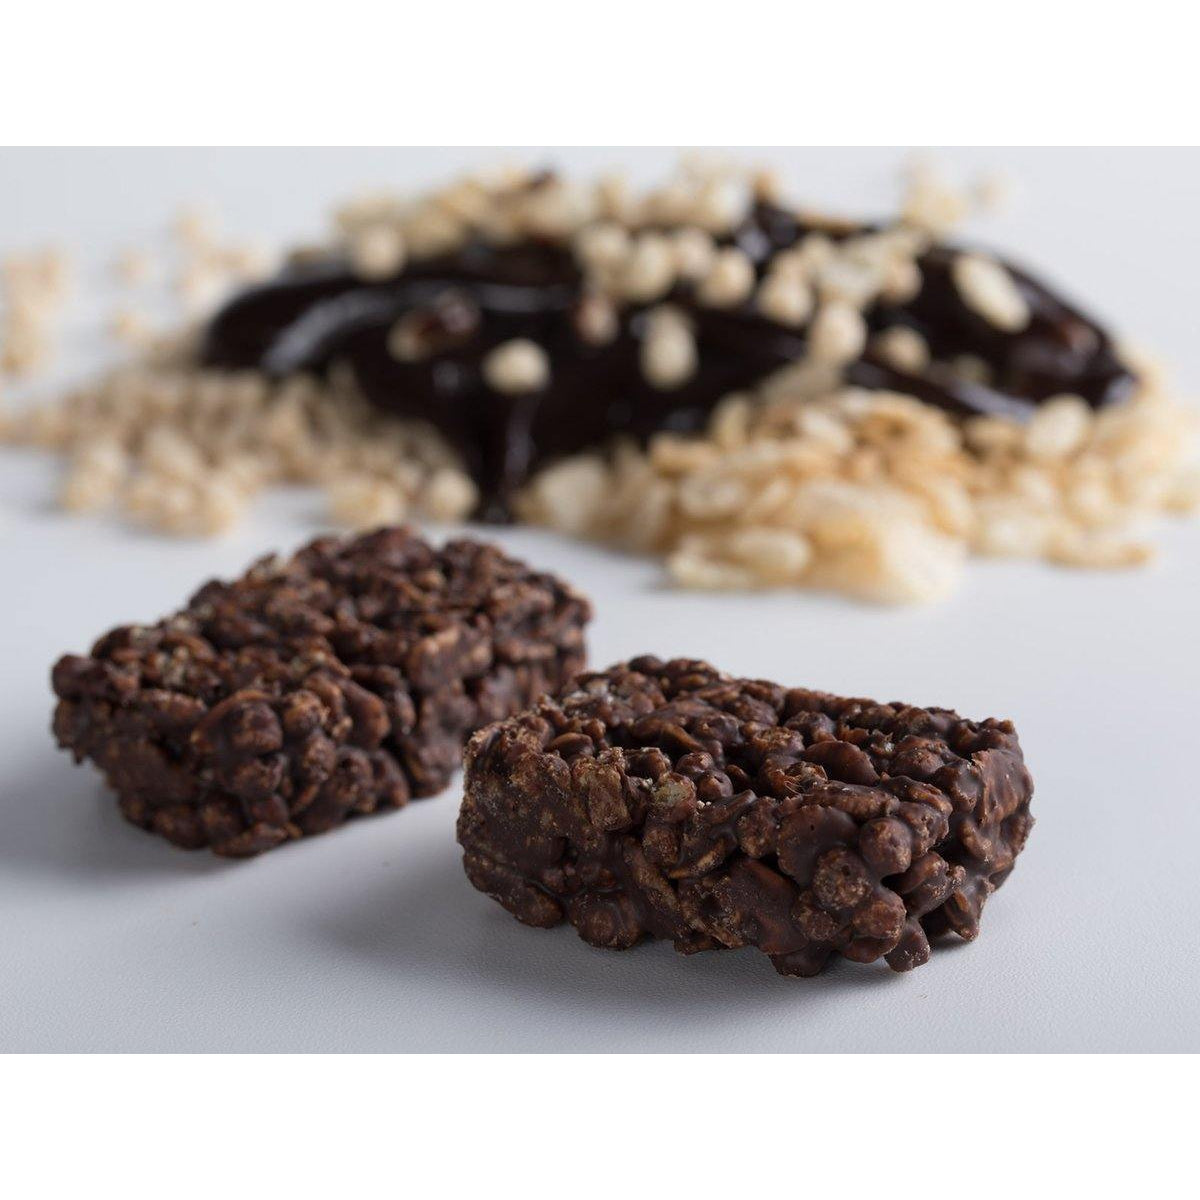 Whole grain snack with quinoa and cranberries in dark chocolate - Homemade - Israel Menu